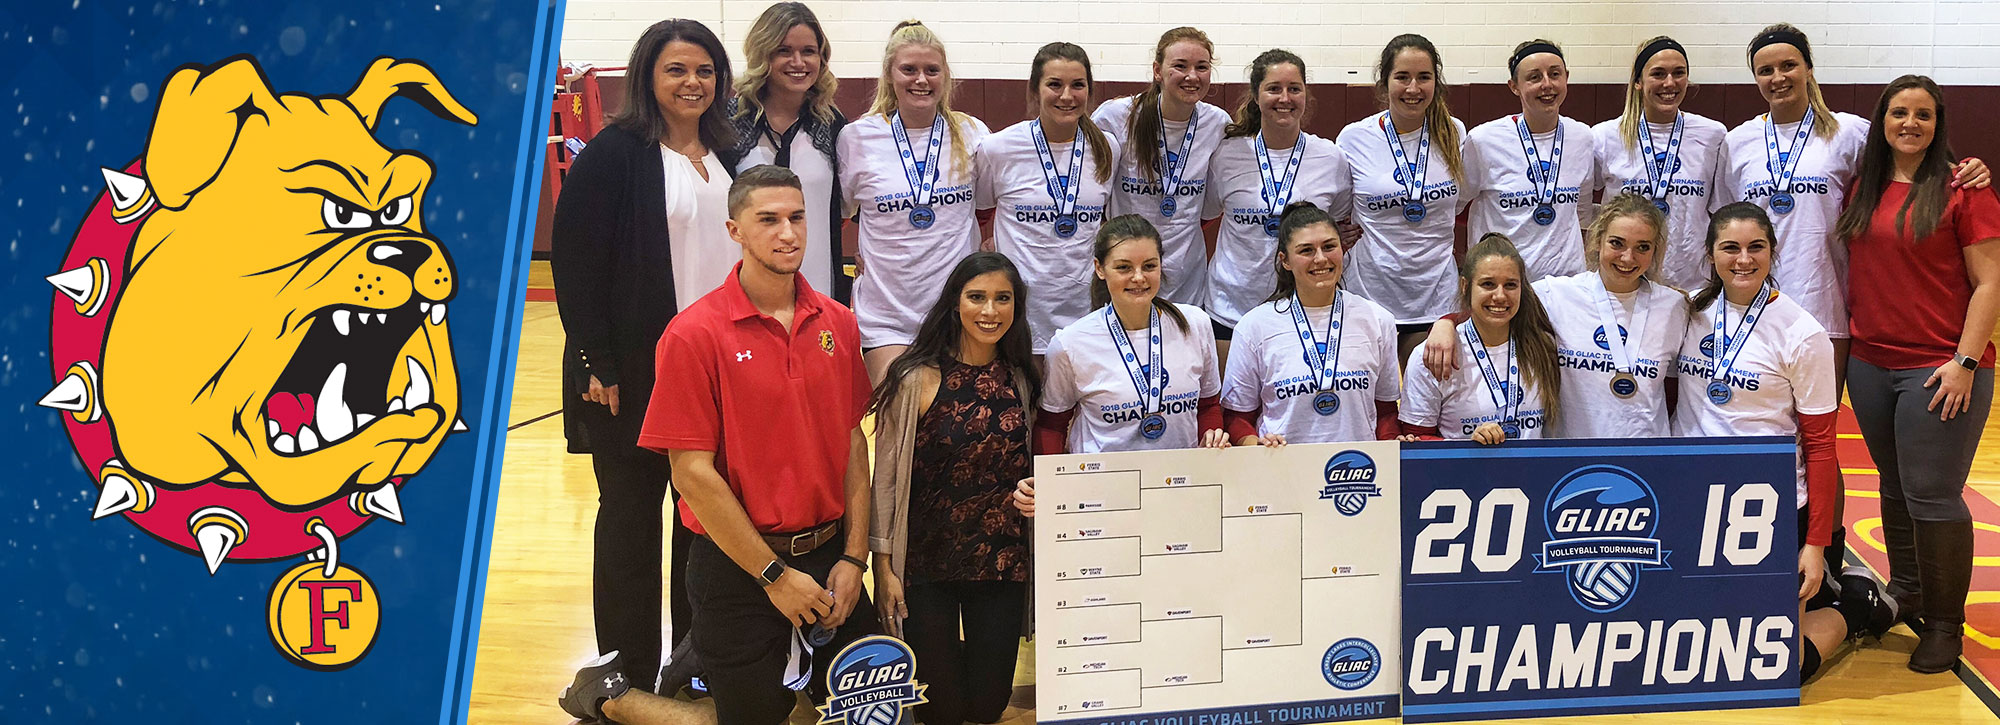 Ferris State Sweeps Davenport to Win Fifth Consecutive GLIAC Volleyball Tournament Title